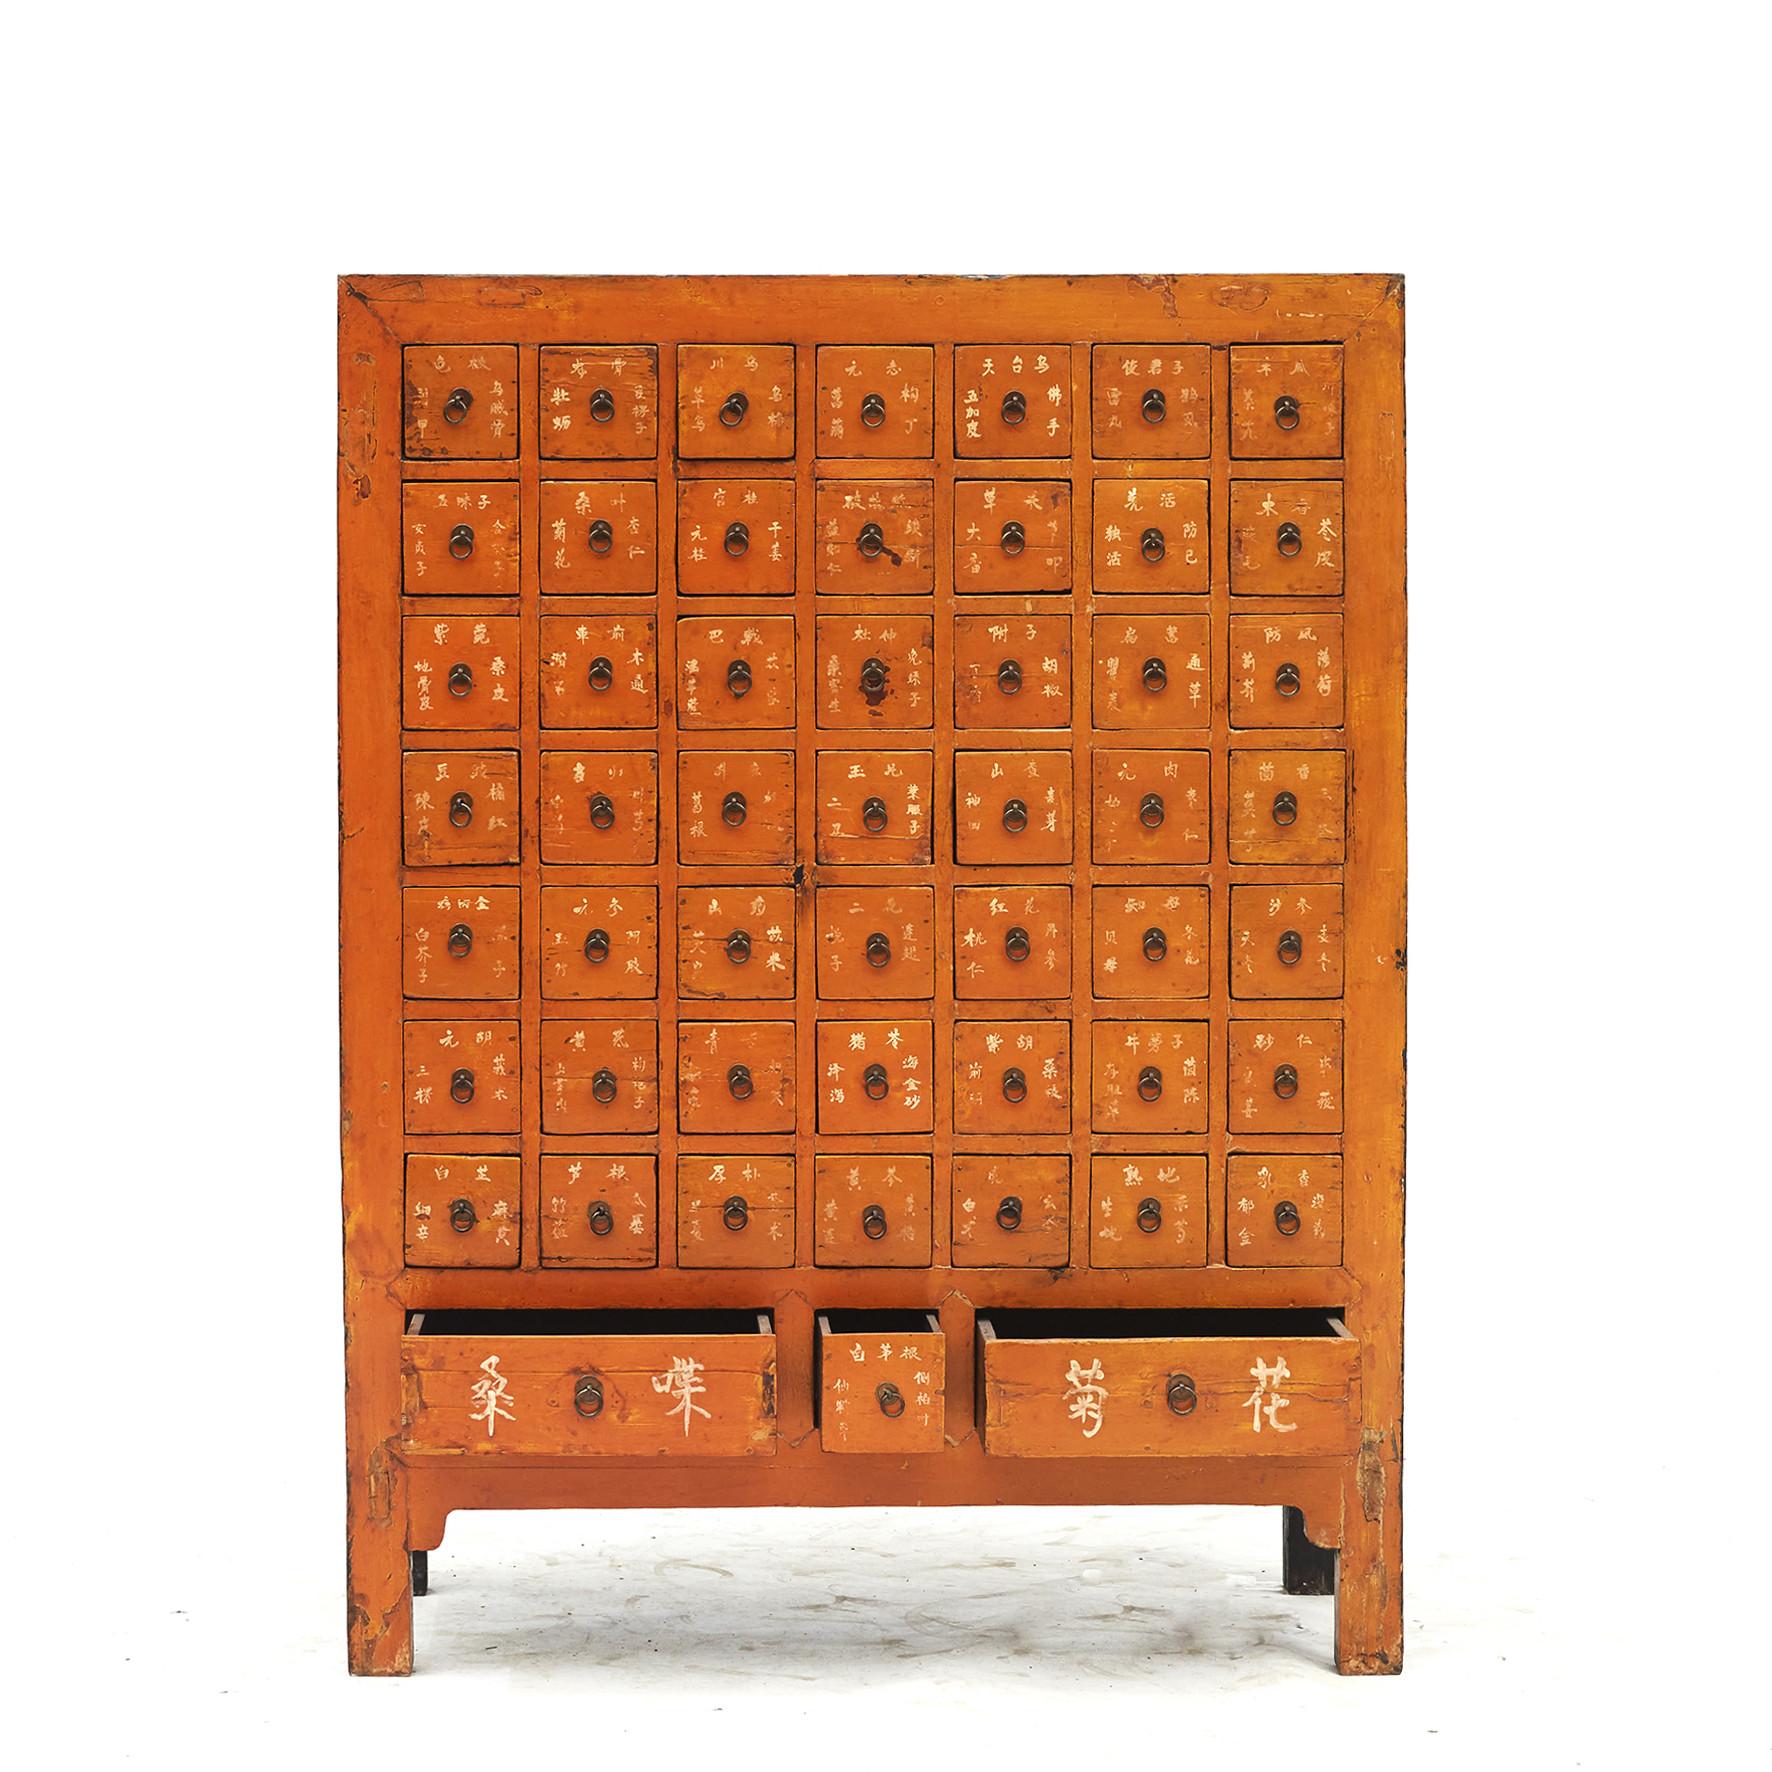 Qing Apothecary Medicine Chest with 52 Drawers